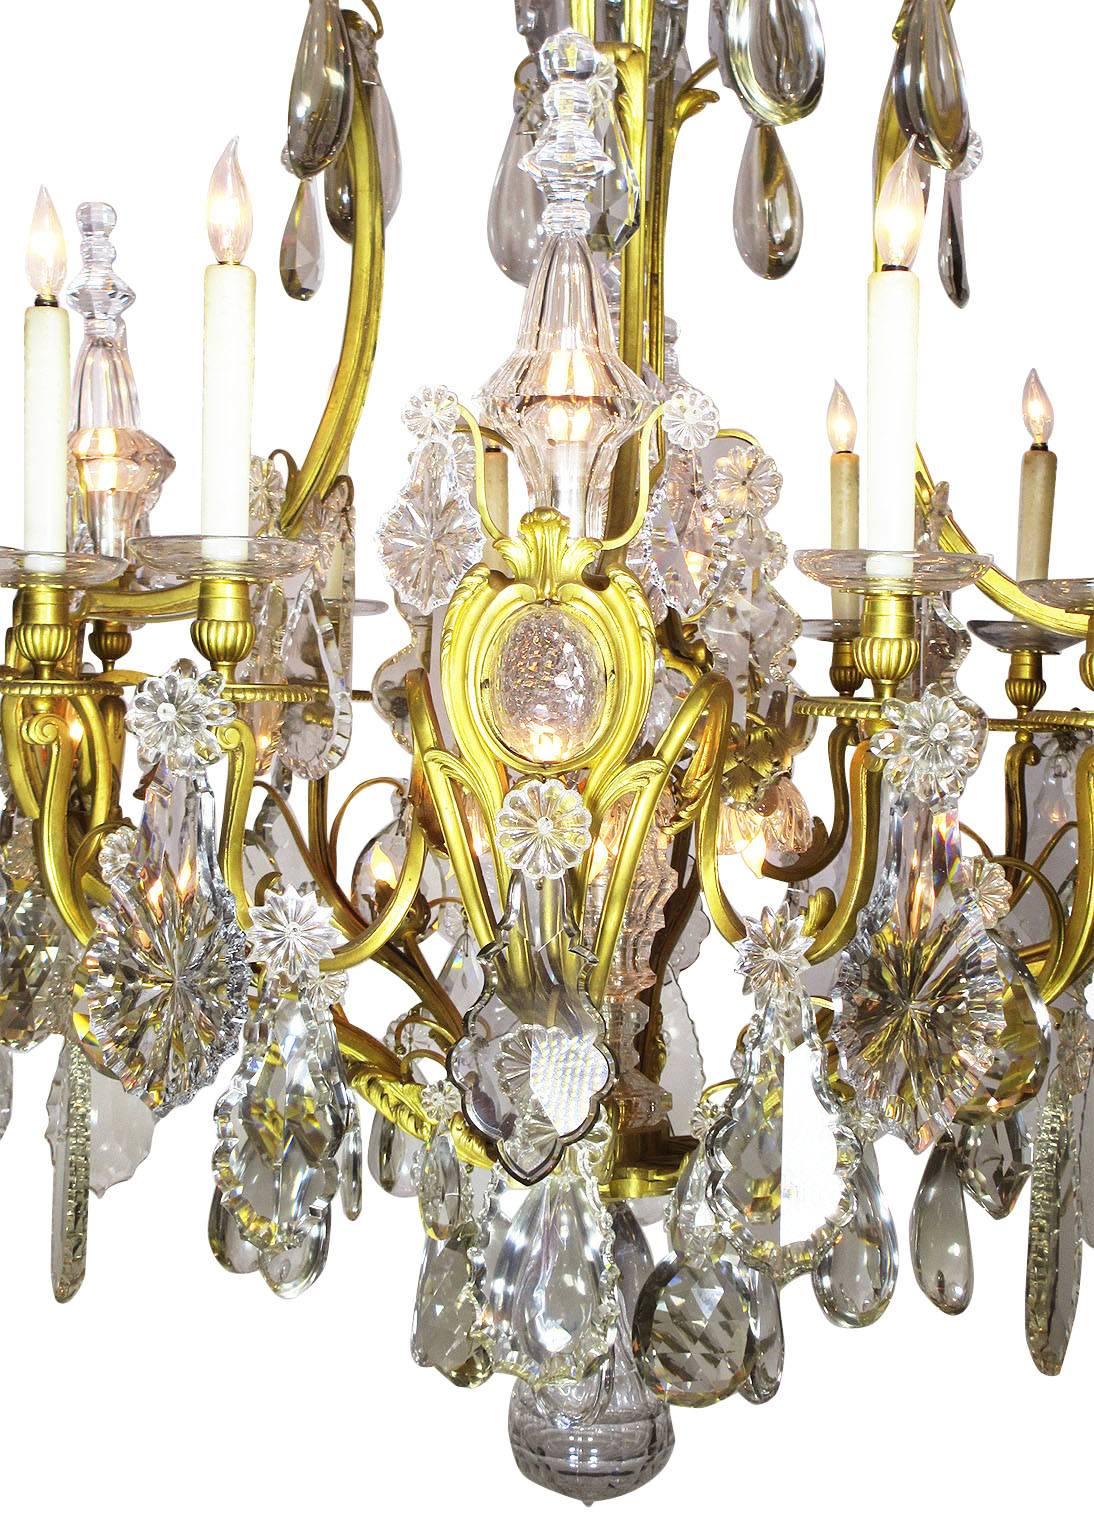 The Spelling Manor living-room chandelier. A very Fine and Palatial French 19th century Louis XV style gilt bronze and Crystal Thirty-Three Light Twelve candelabra Chandelier attributed to Baccarat. The large finely chased gilt bronze frame